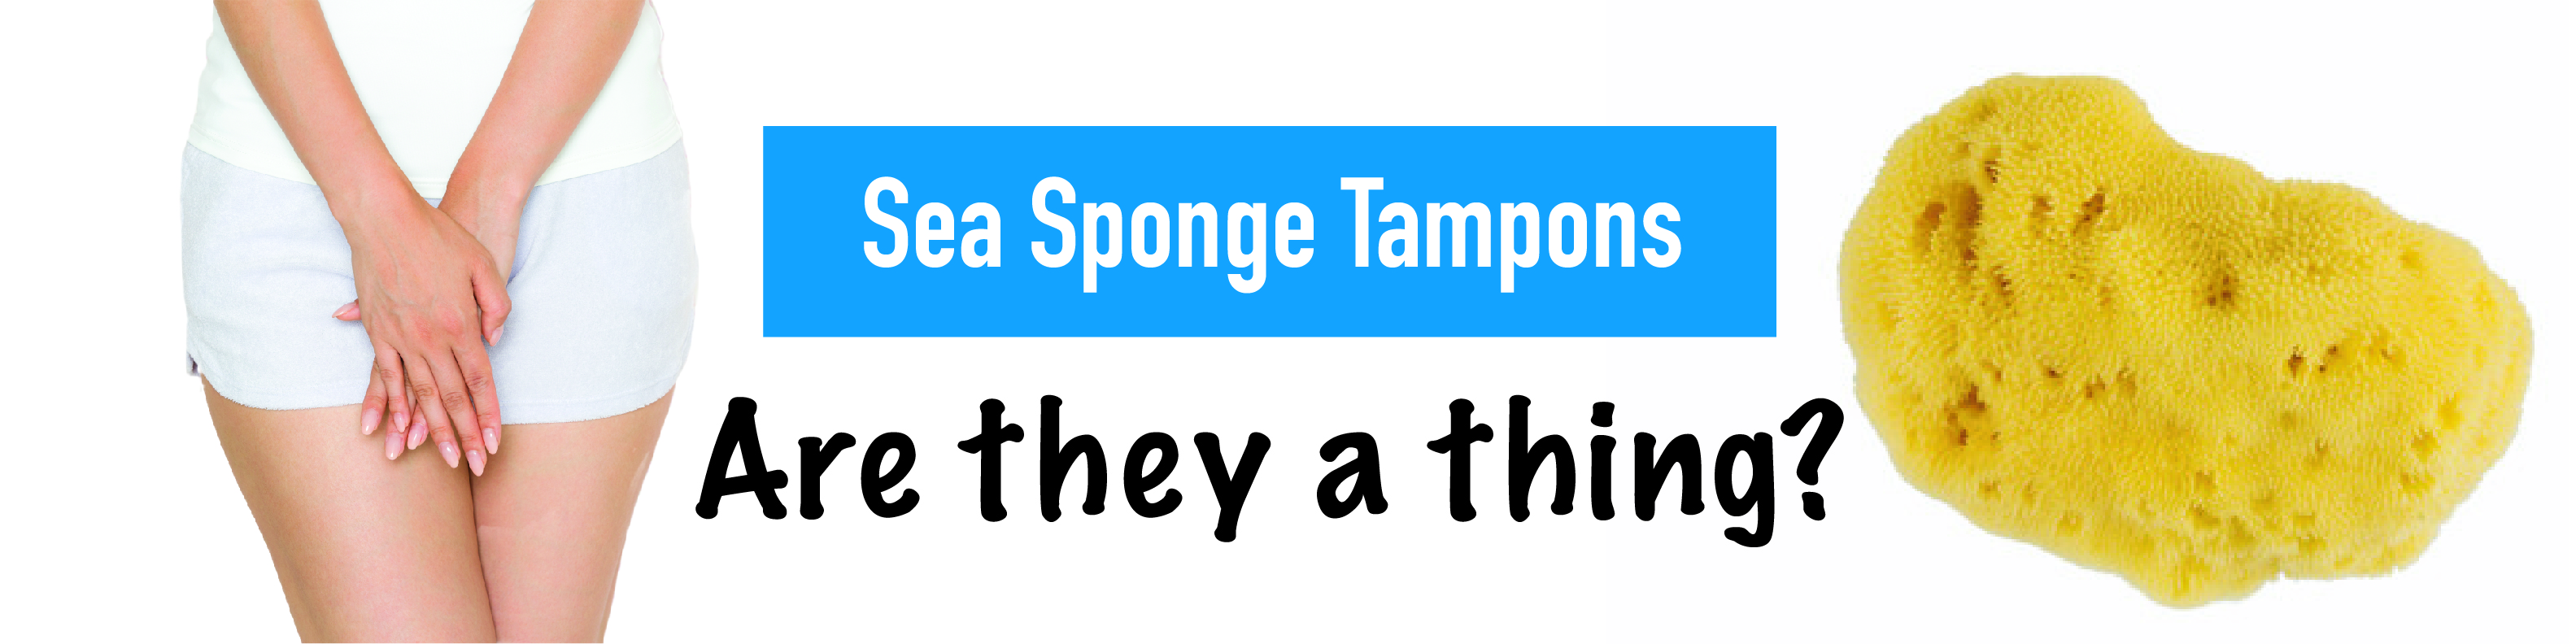 Sea Sponge Tampons. Are They A Thing?